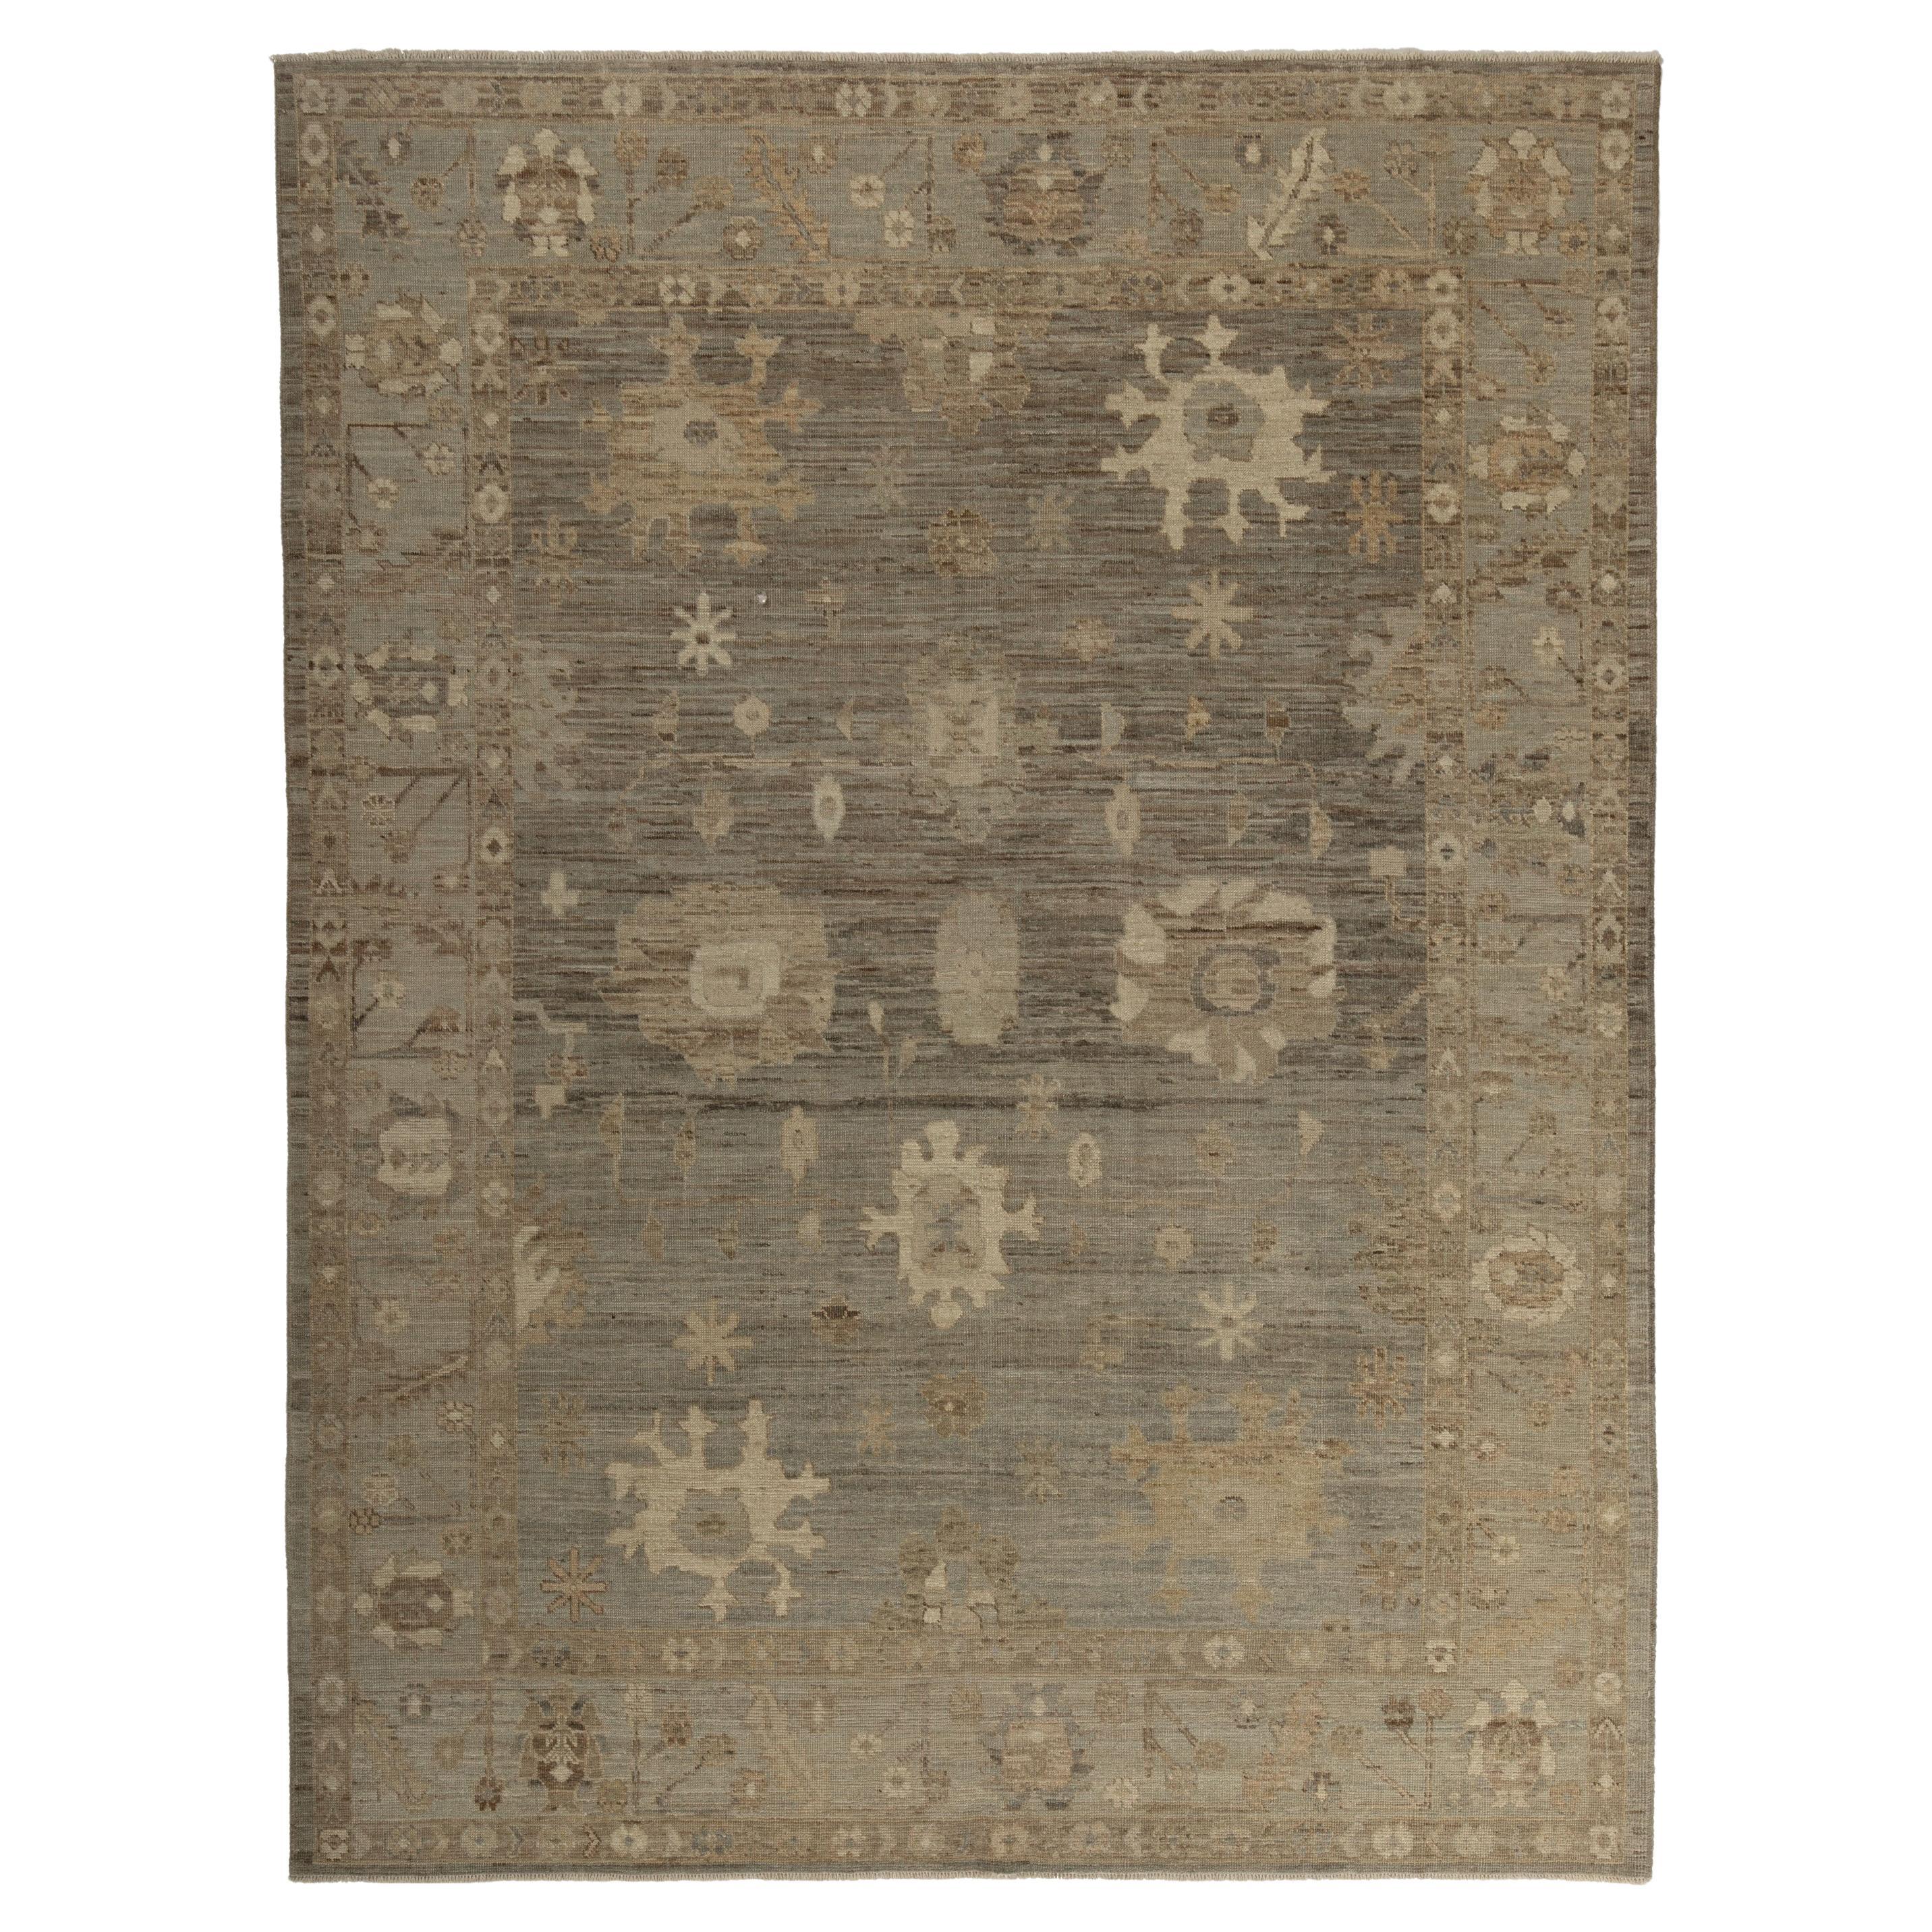 abc carpet Zameen Multicolored Traditional Wool Rug - 7'8" x 9'7" For Sale